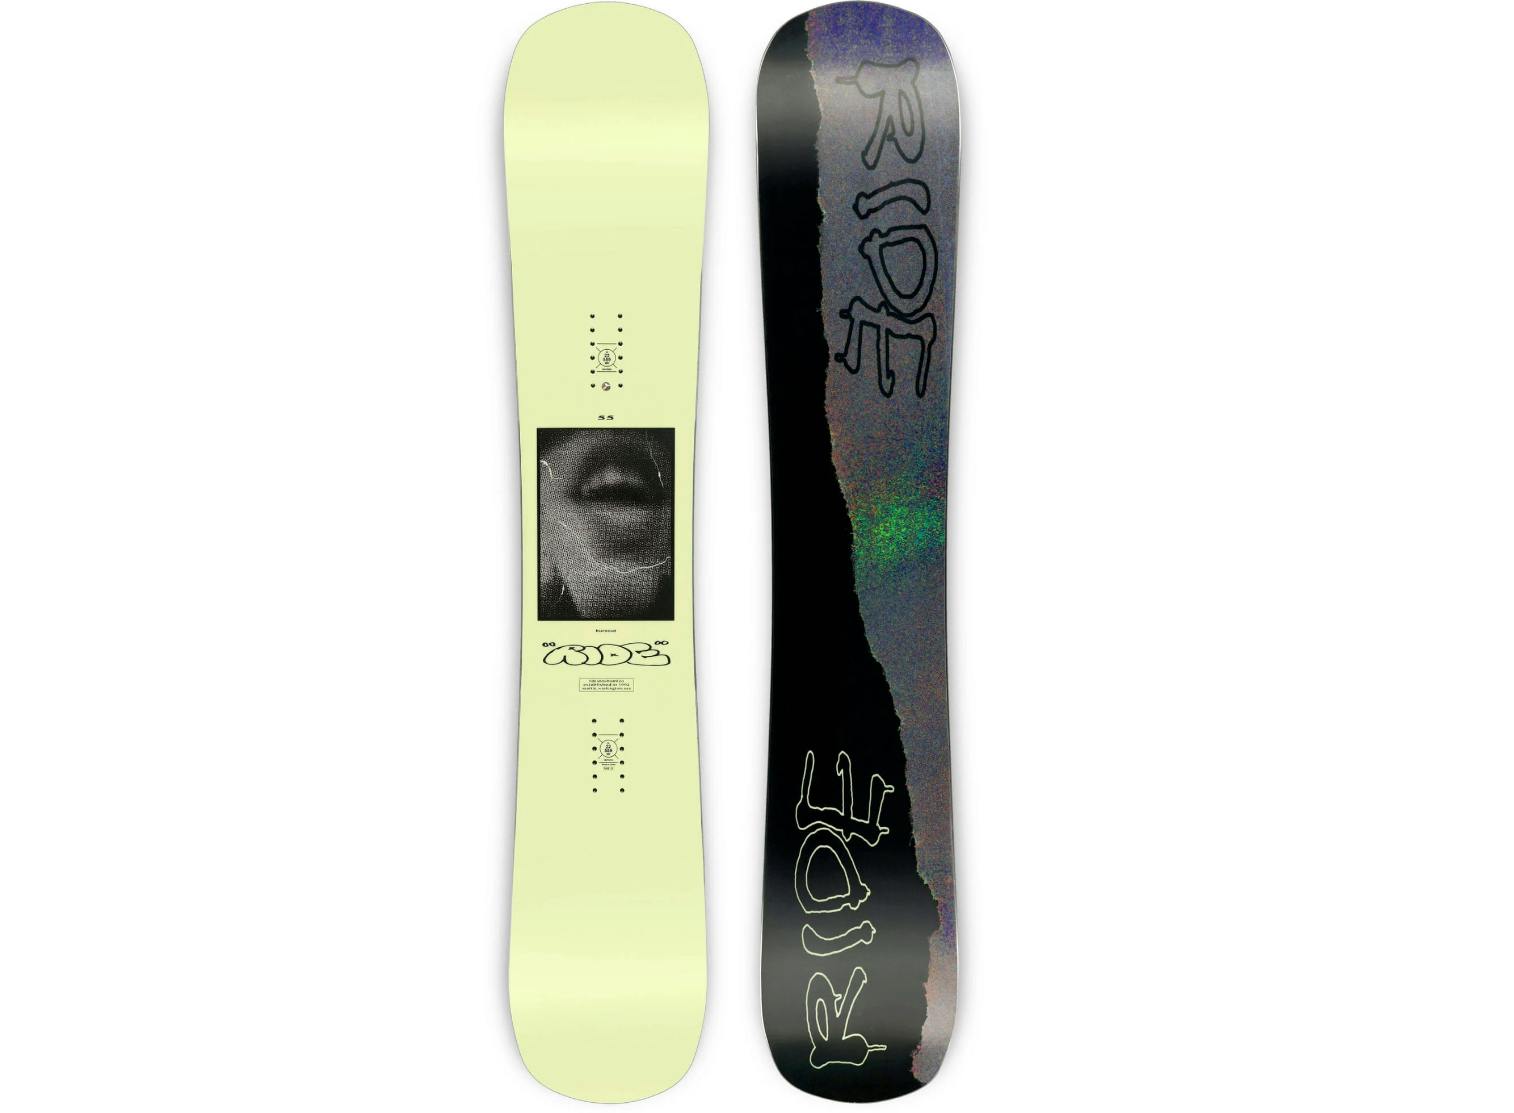 The Ride Burnout snowboard.